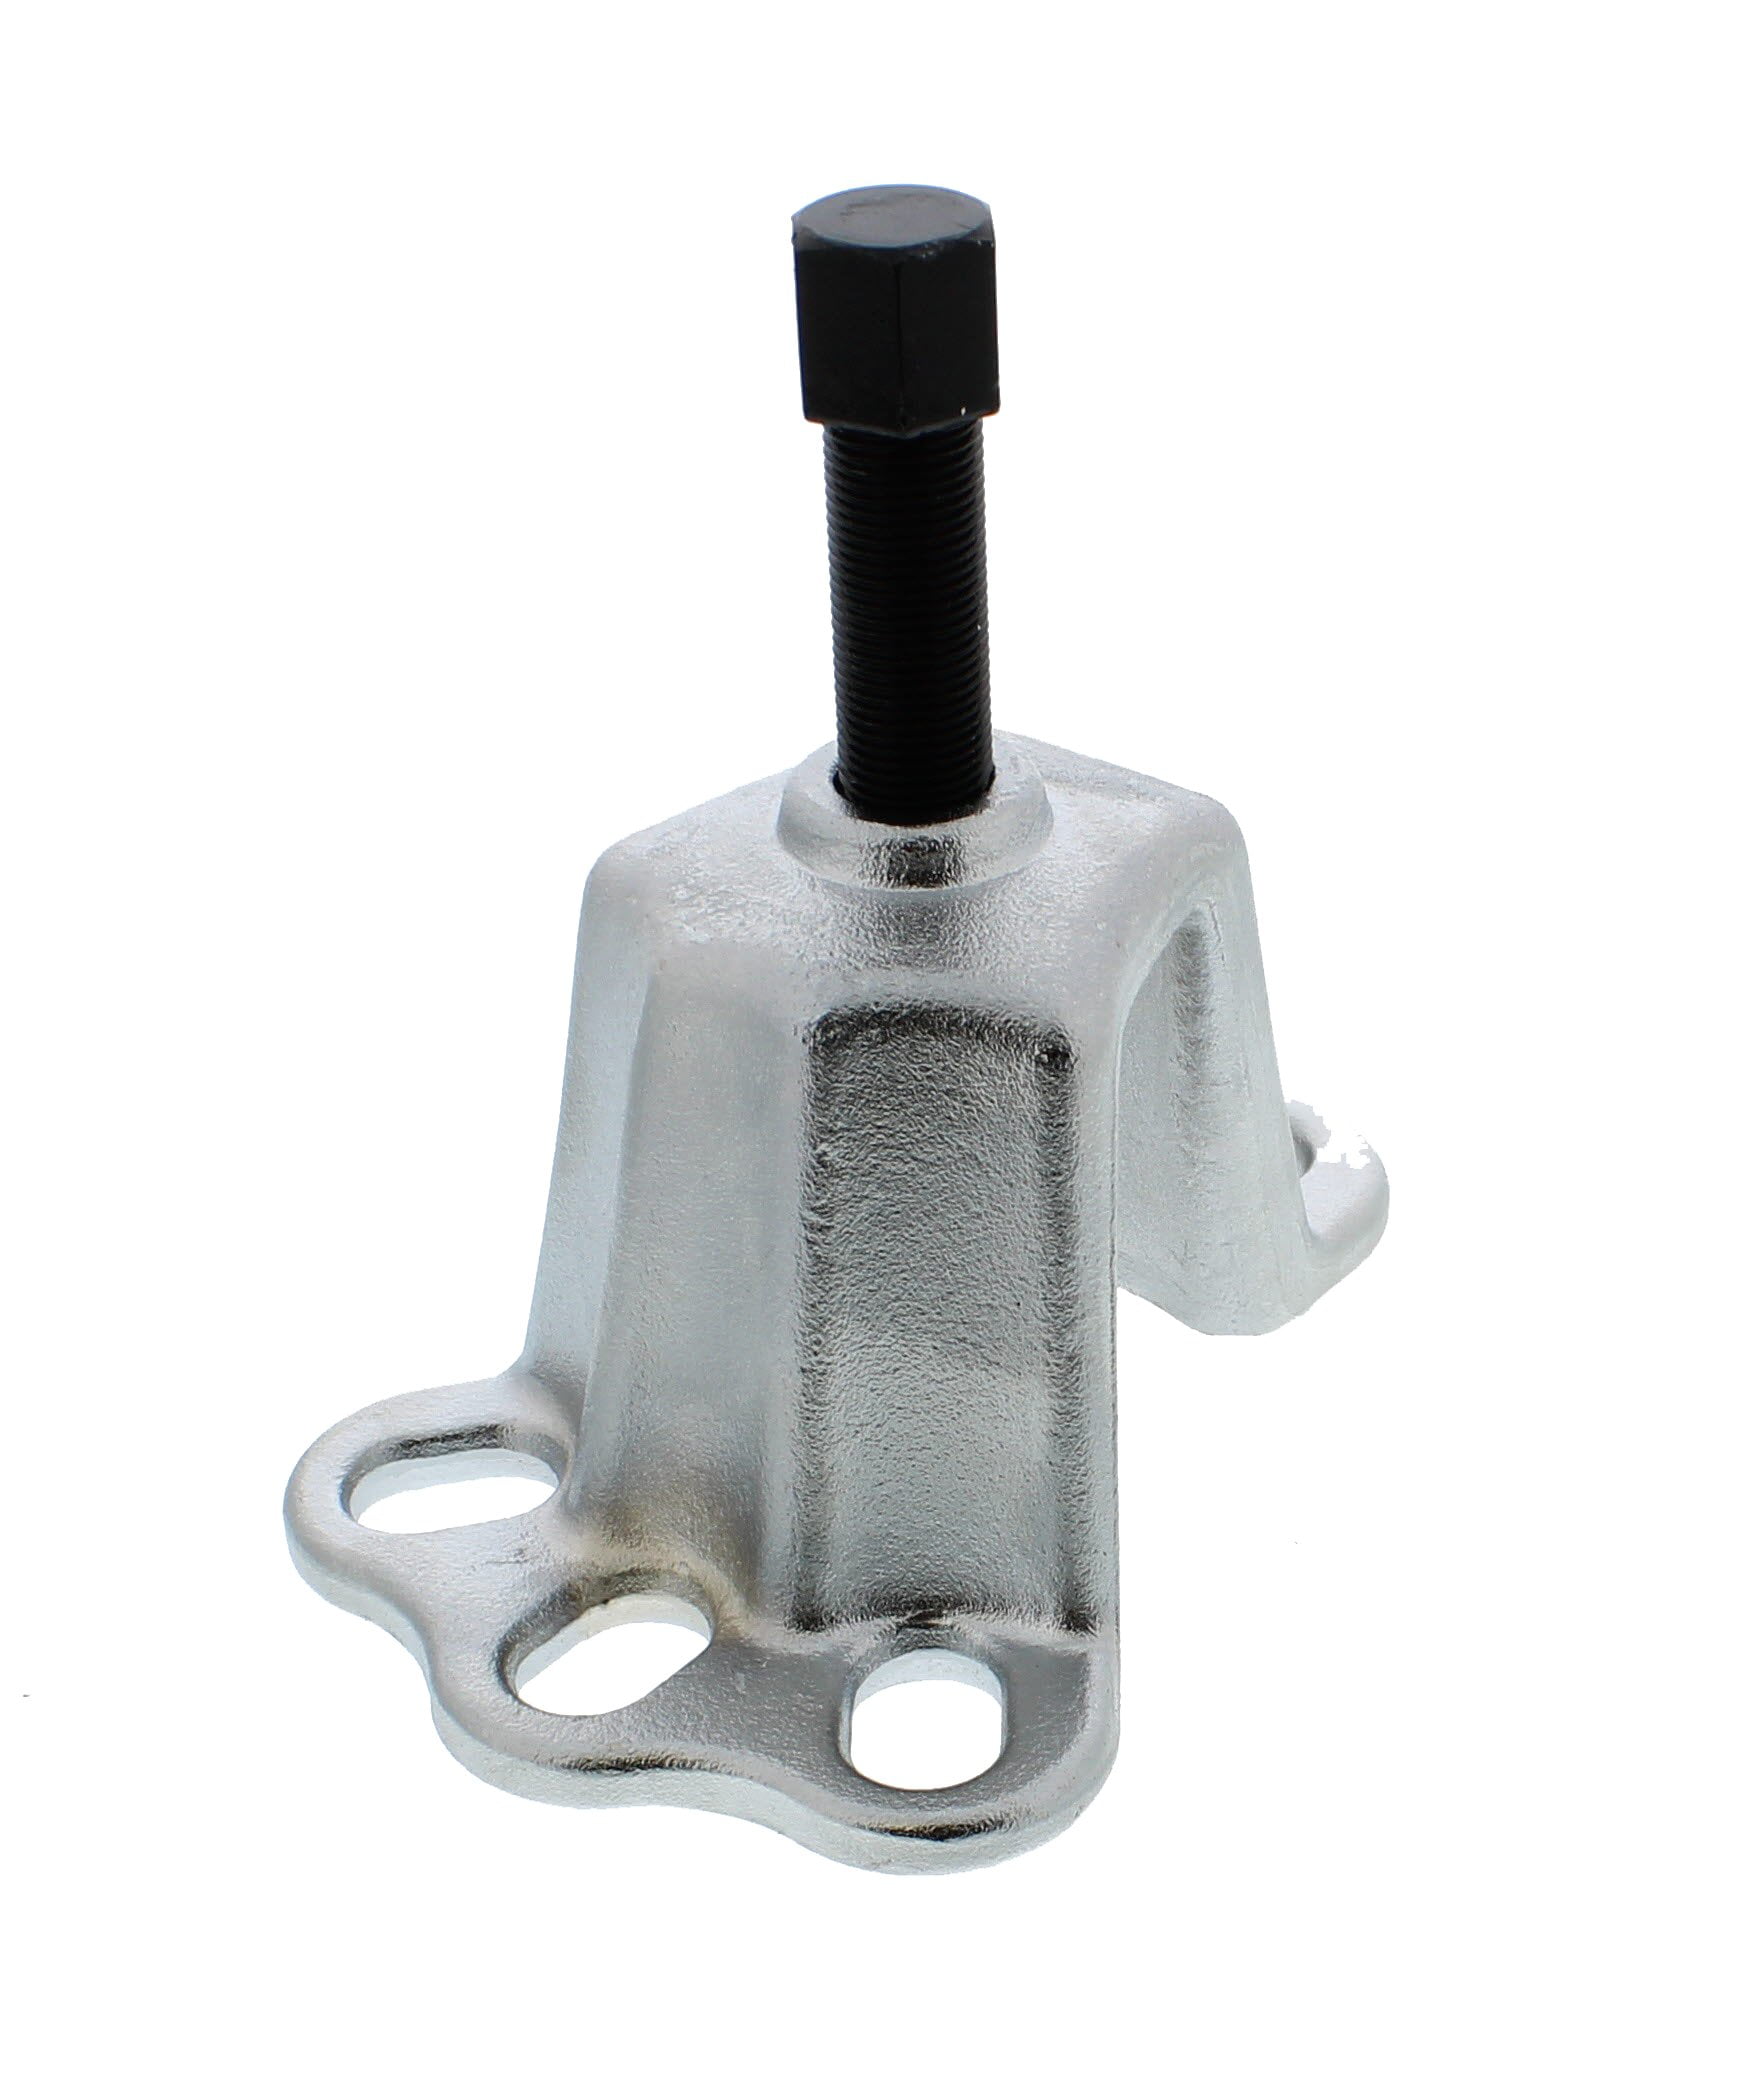 OCPTY Useful Flange Type Axle & Front Wheel Hub Puller Tool Applicable for Most Cars Repair Kit